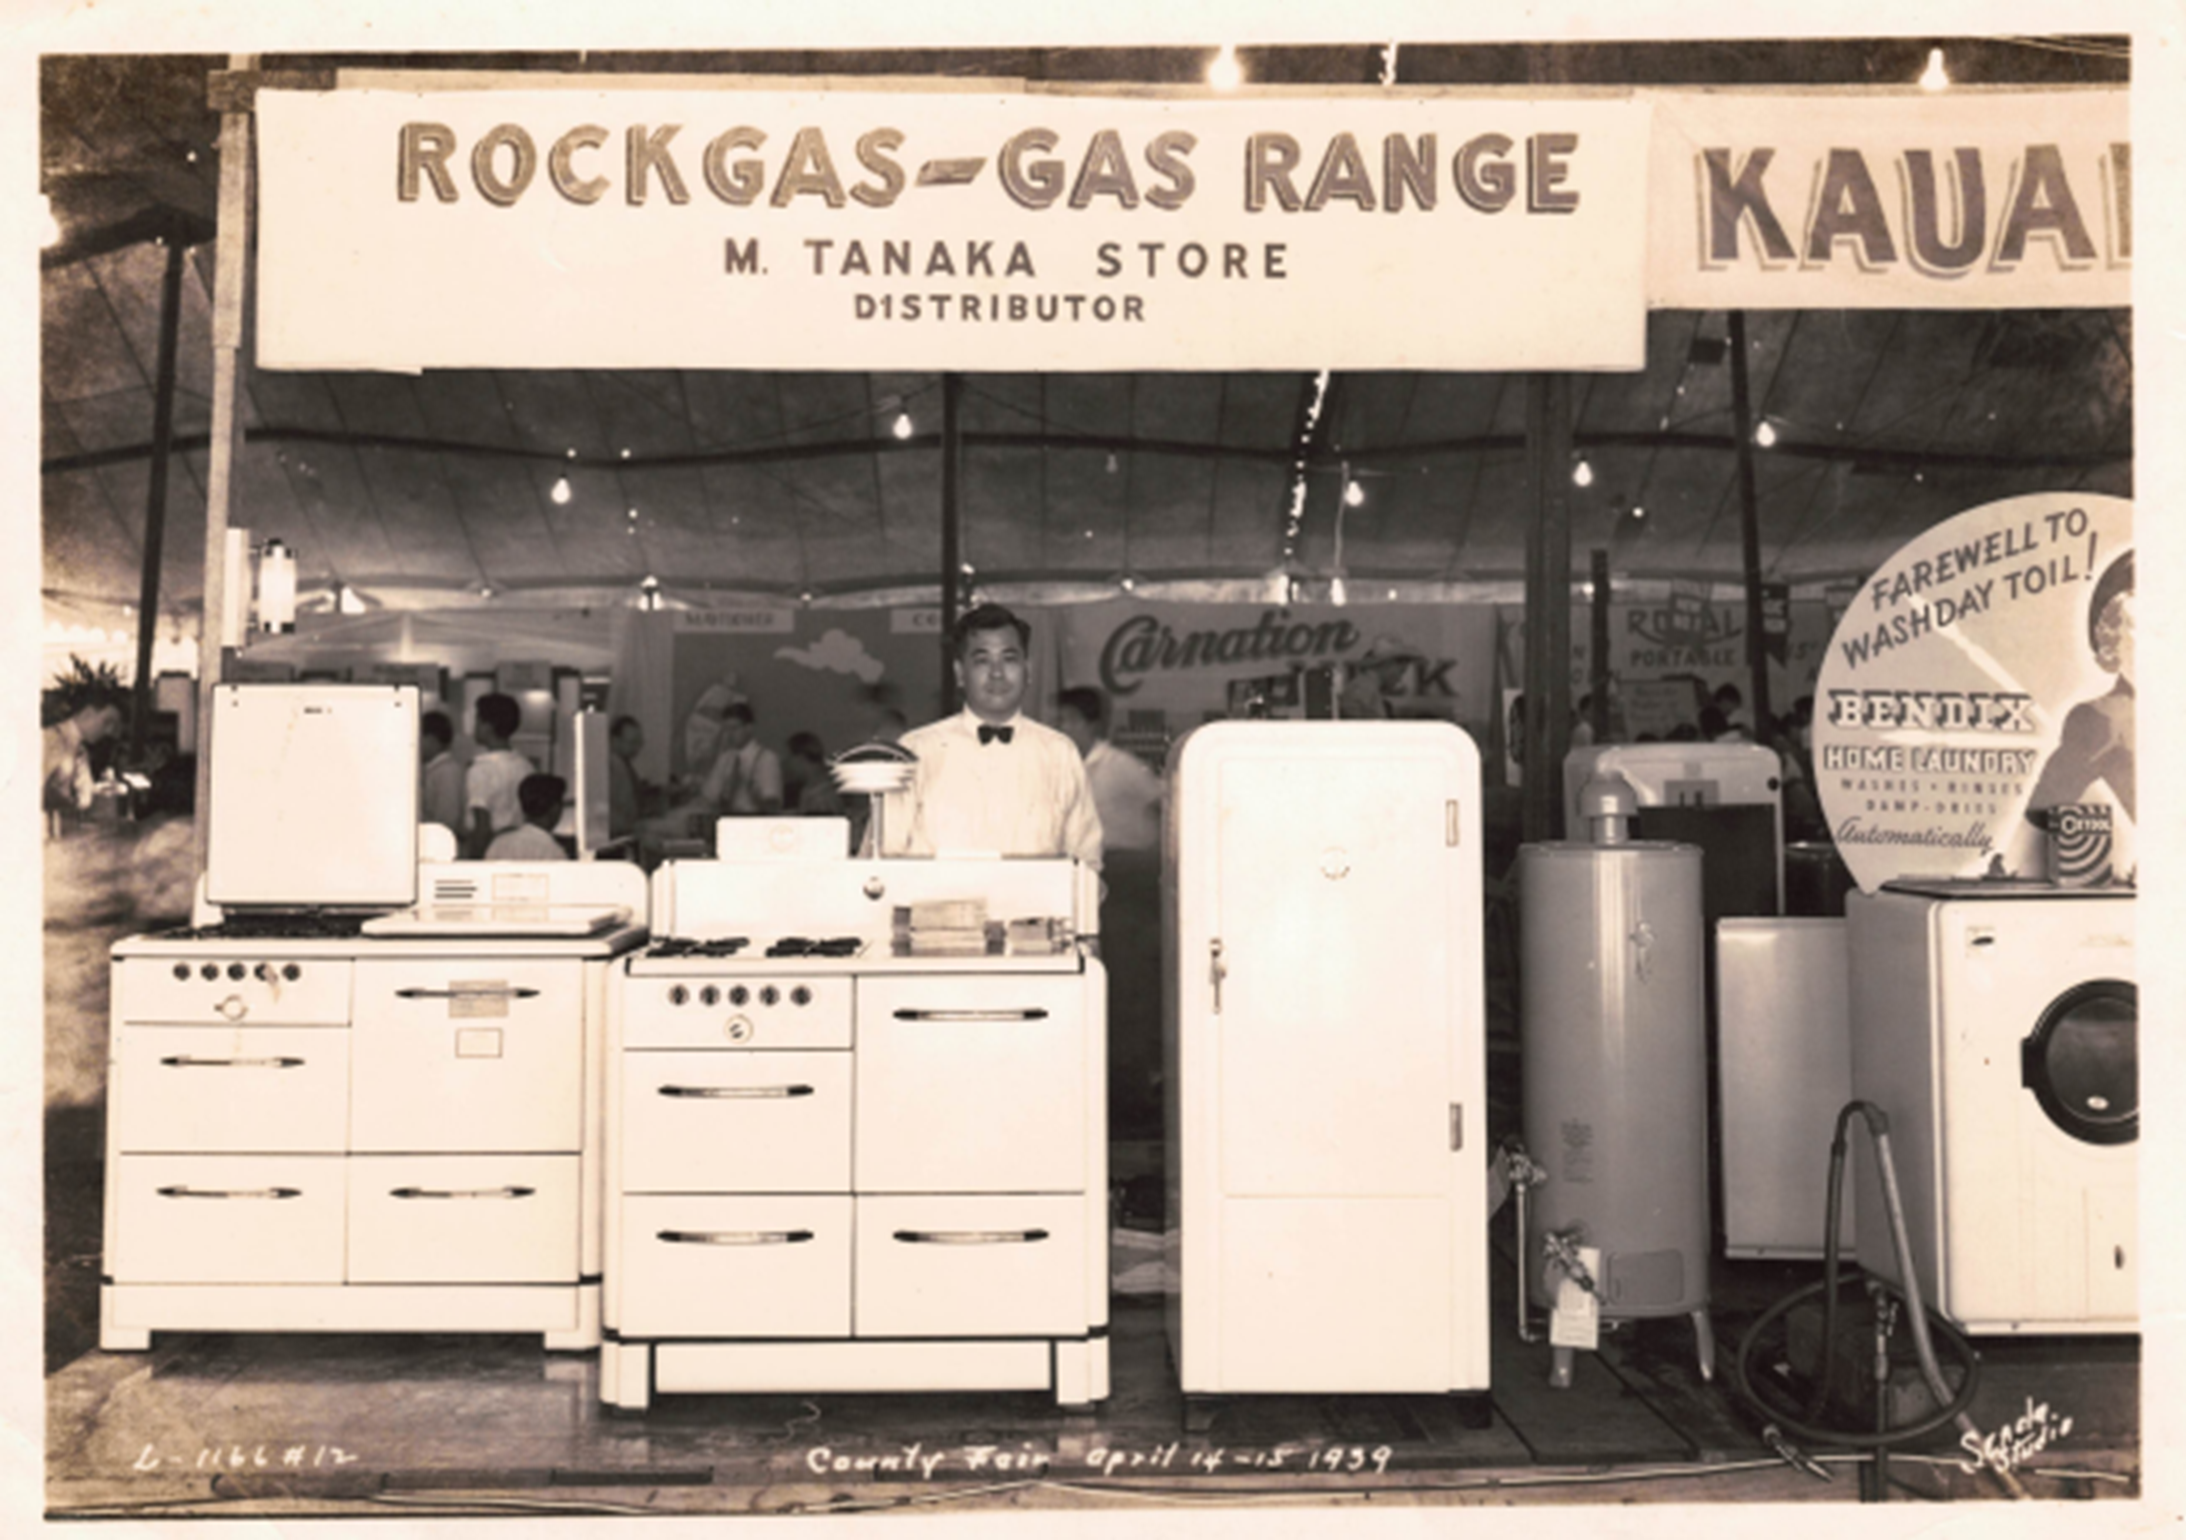 Historic photo of the M Tanaka Store front